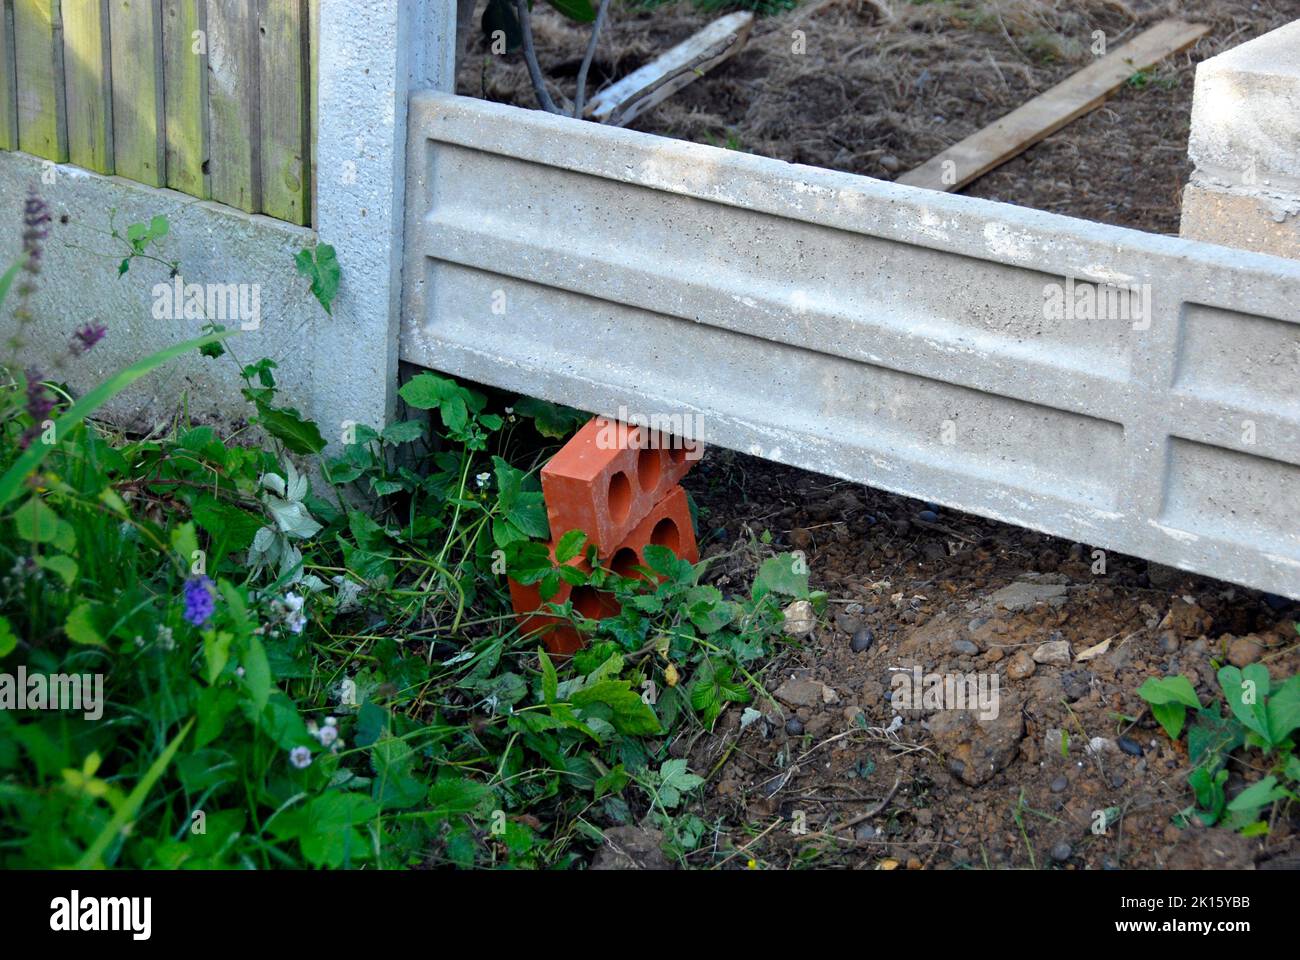 Temporary placement of a concrete gravel board during construction of  a fence Stock Photo